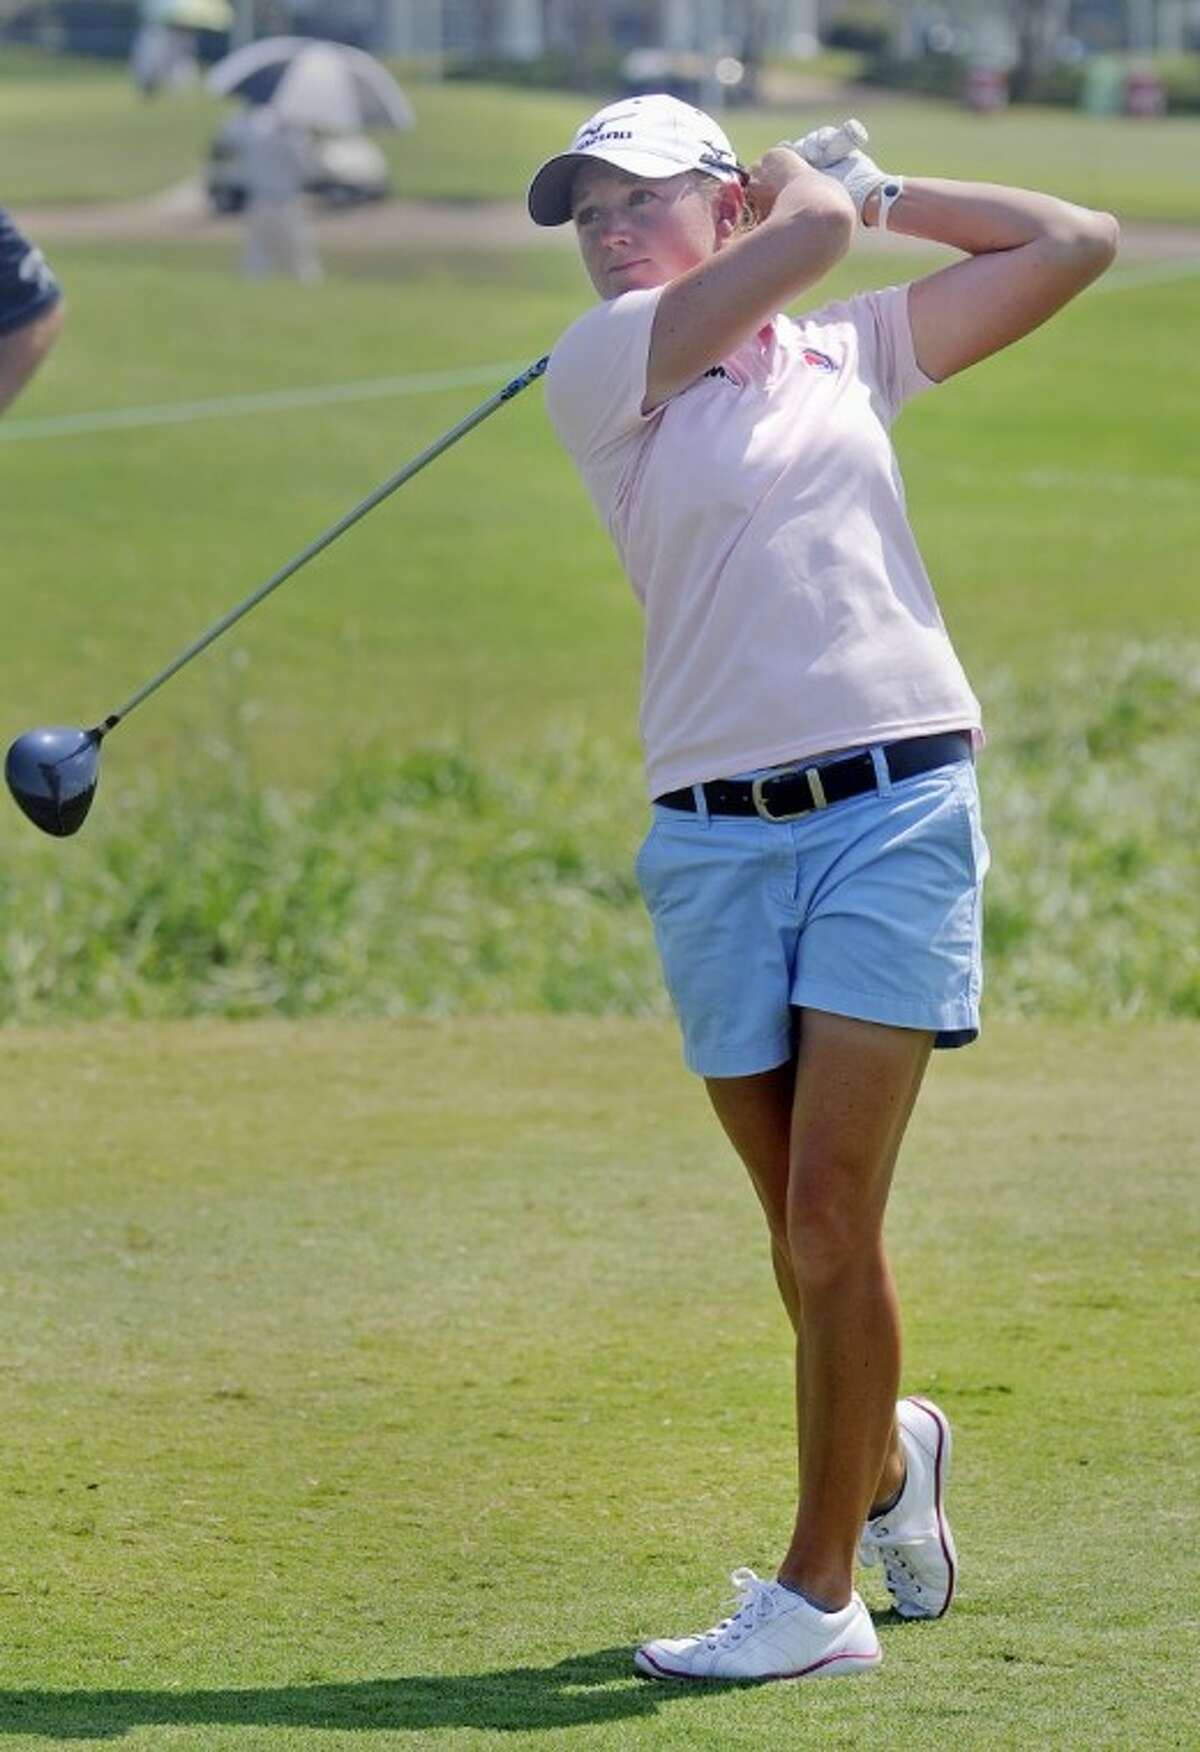 Stacy Lewis of The Woodlands leads the Navistar LPGA Classic after shooting a 7-under 65 on Saturday in Prattville, Ala.